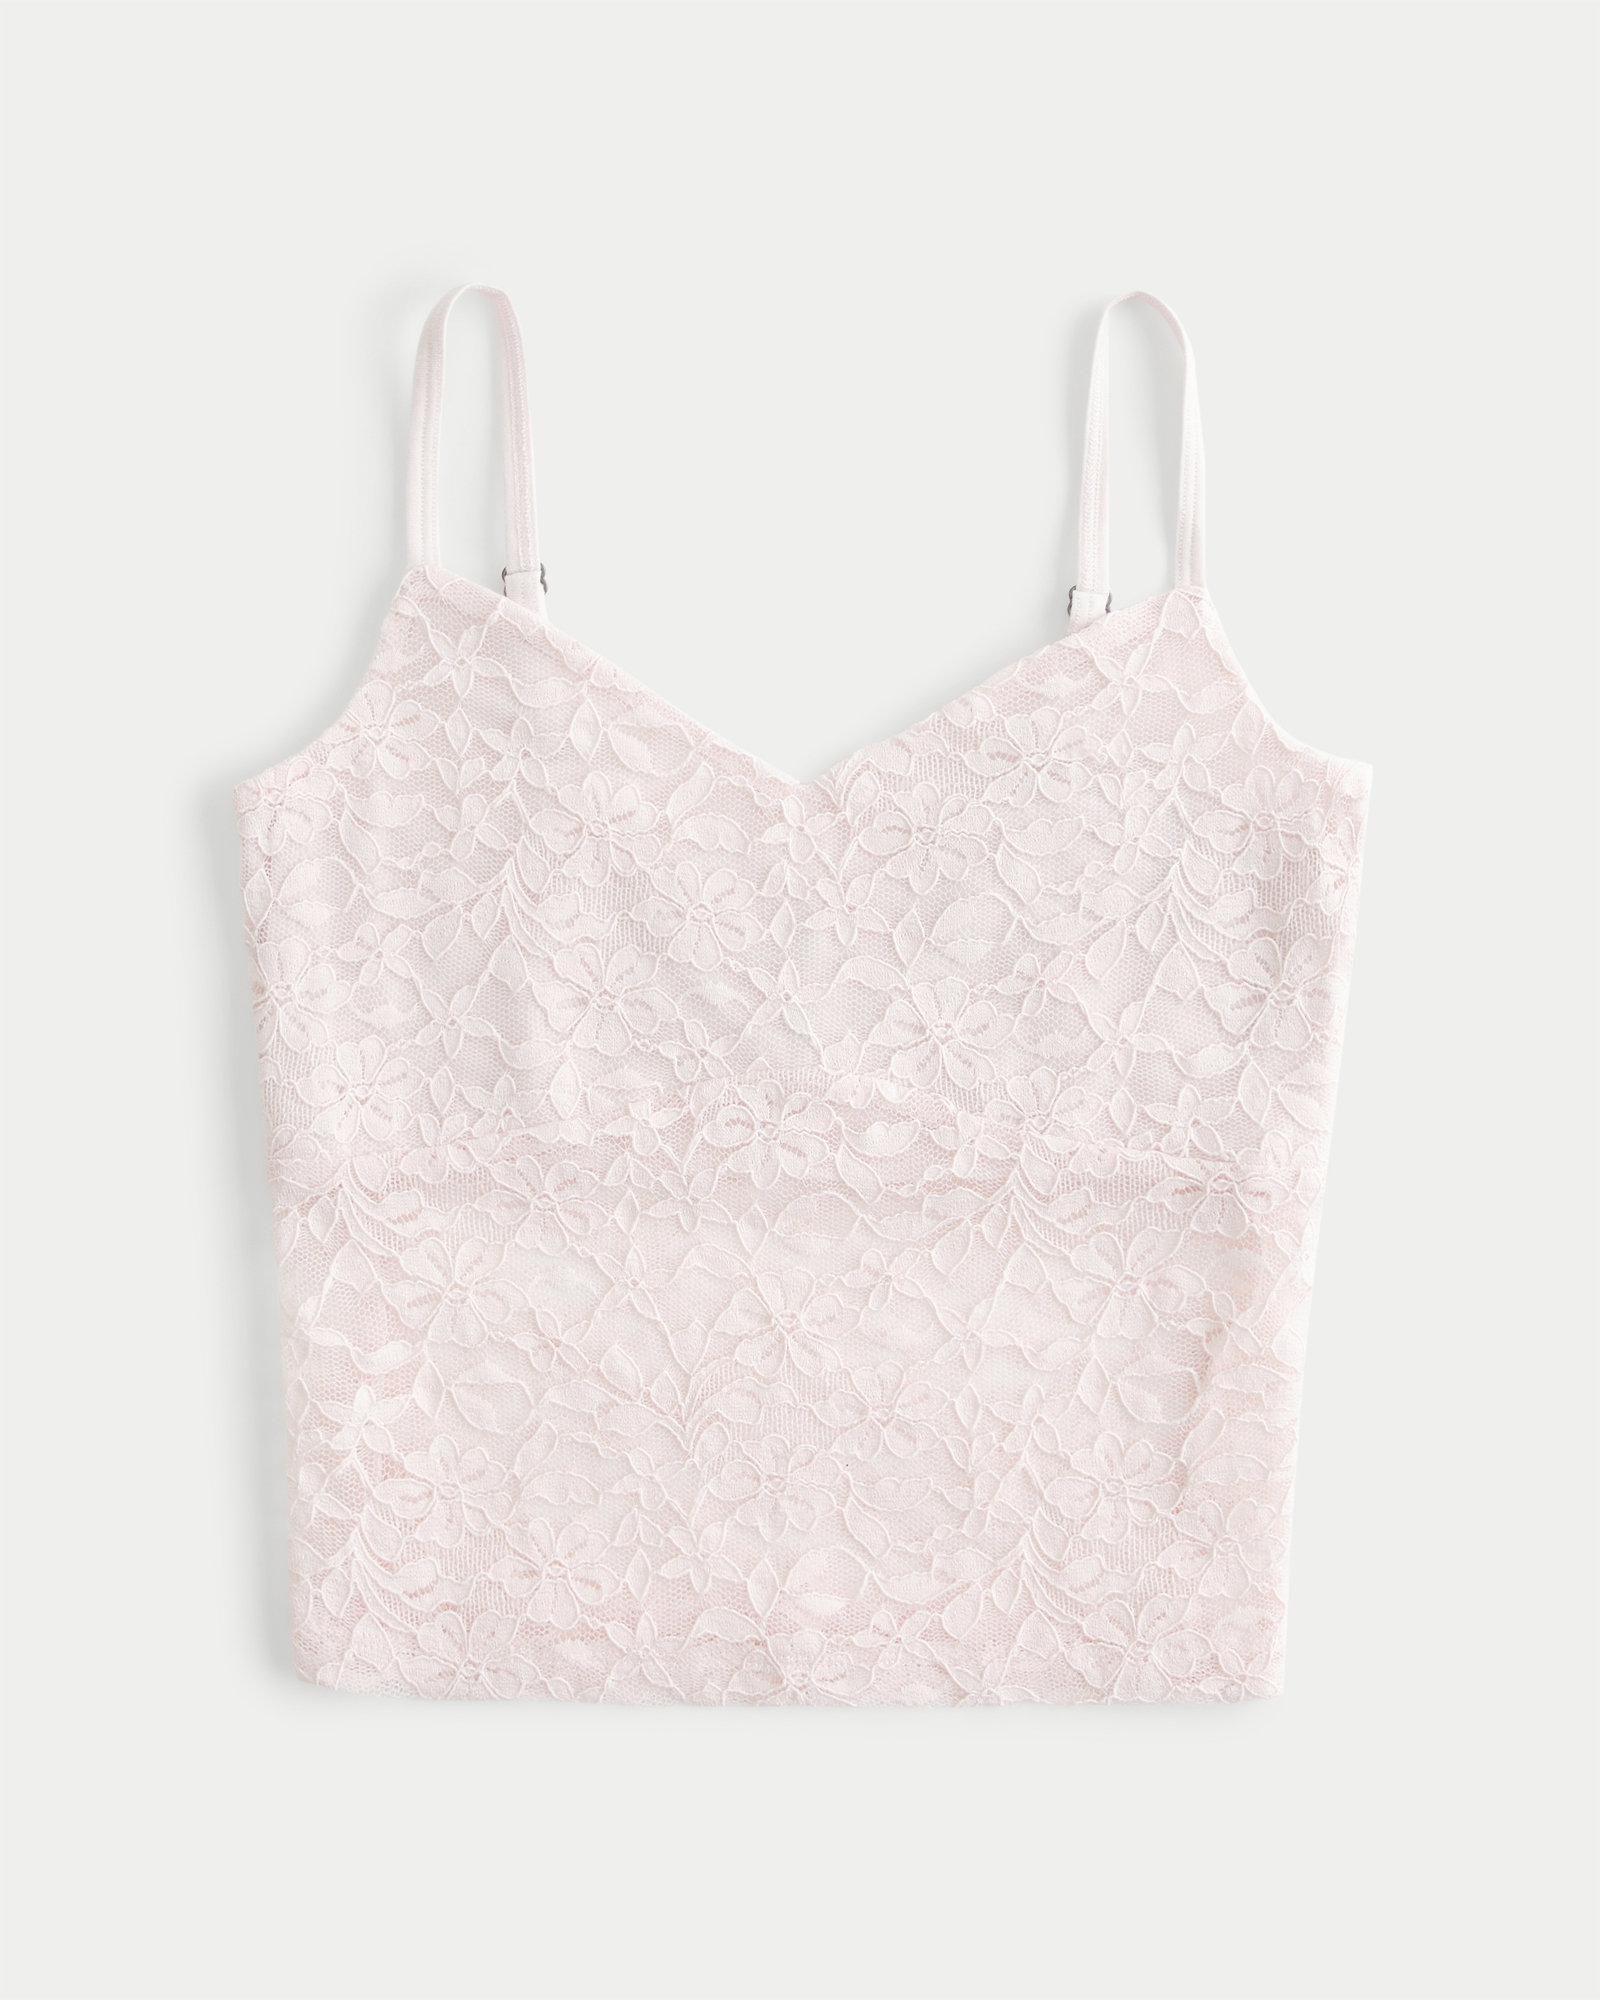 Hollister Lace Cami Blue - $15 (40% Off Retail) - From Eva